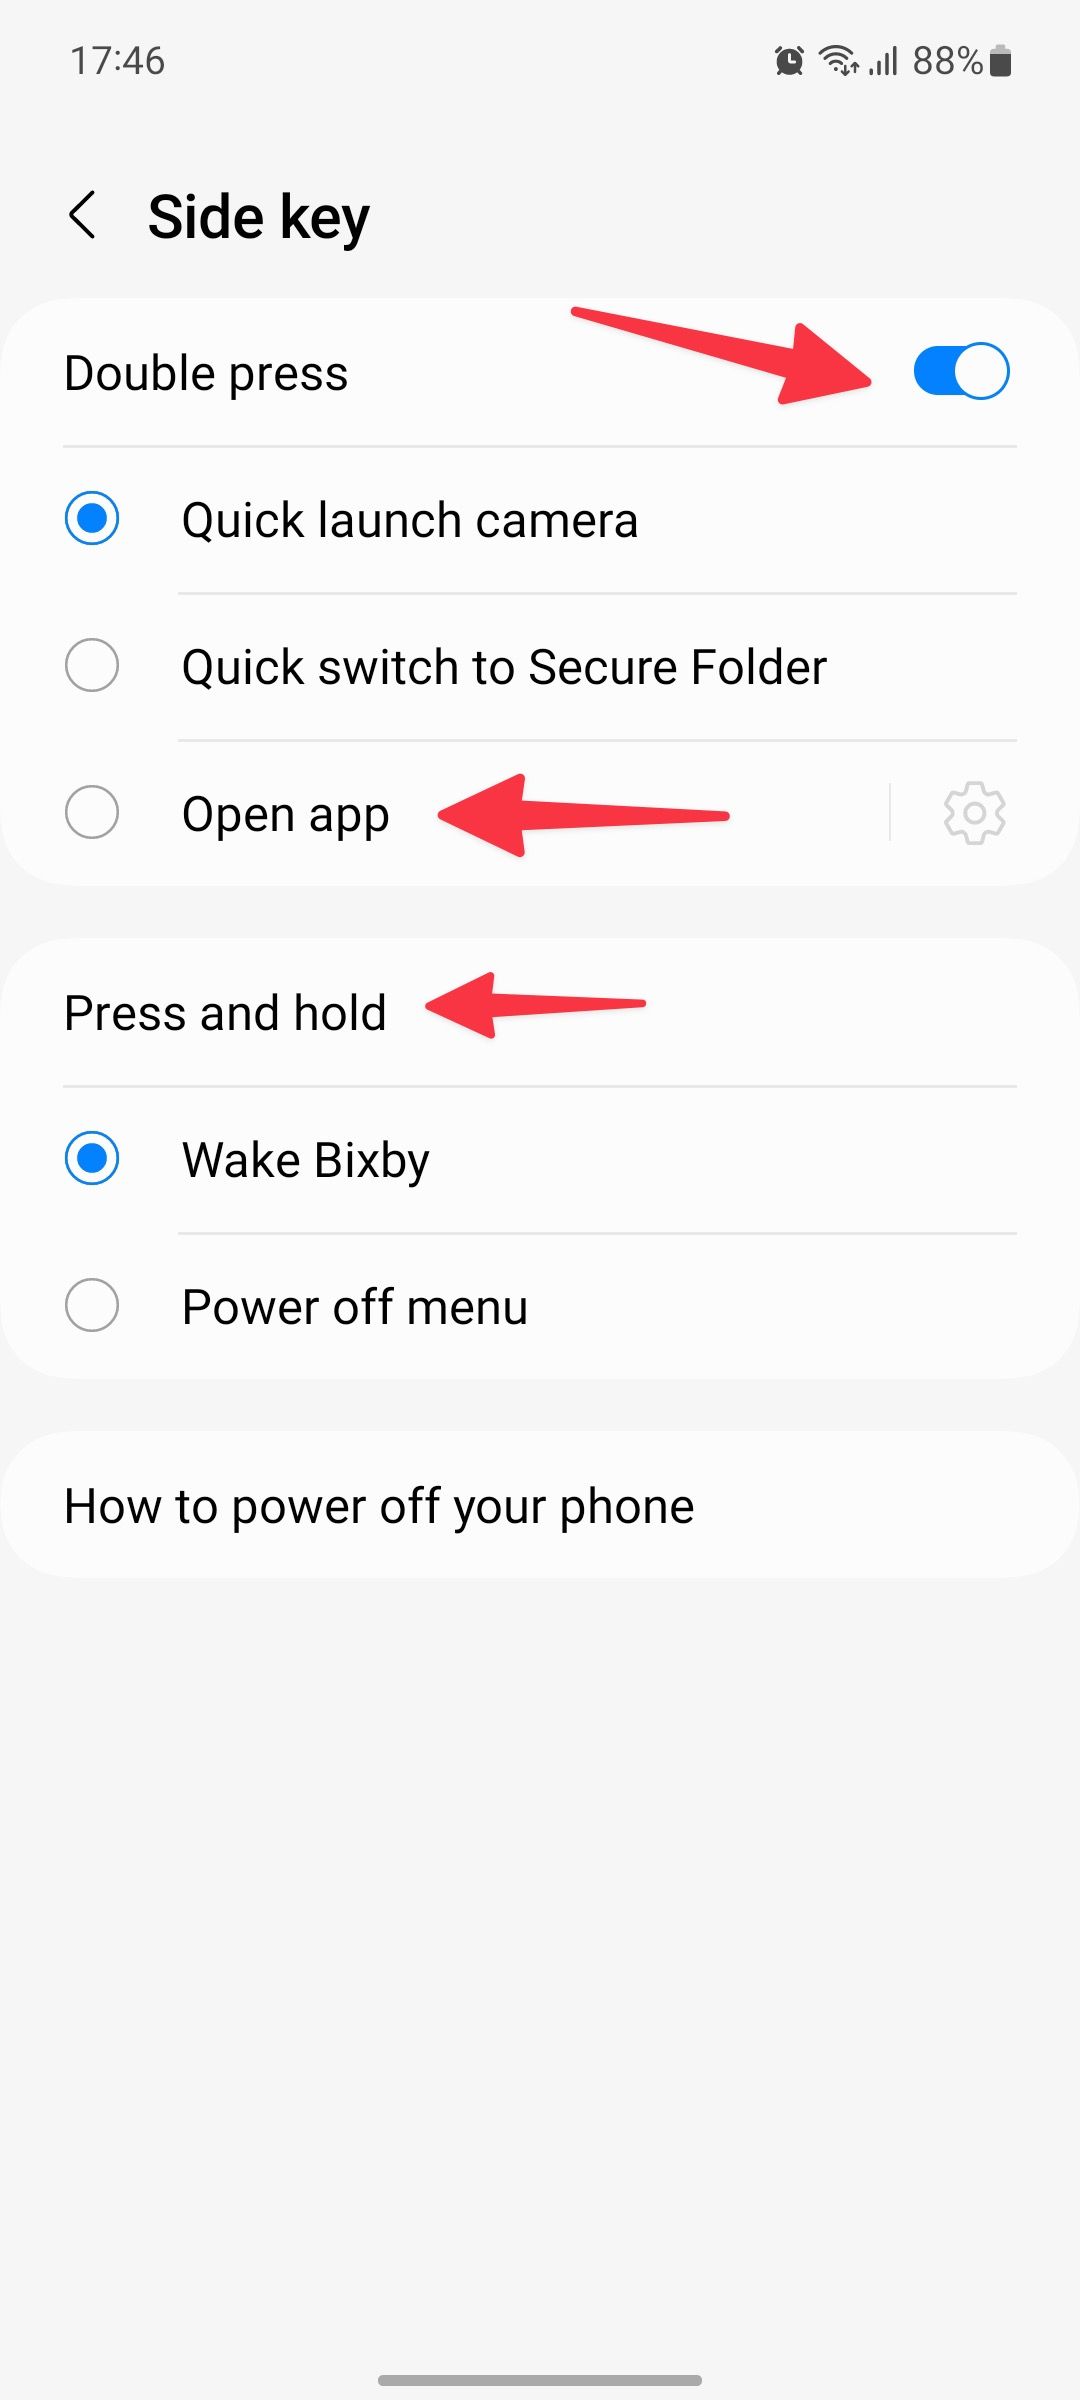 The Side key settings in the Settings app on a Samsung phone